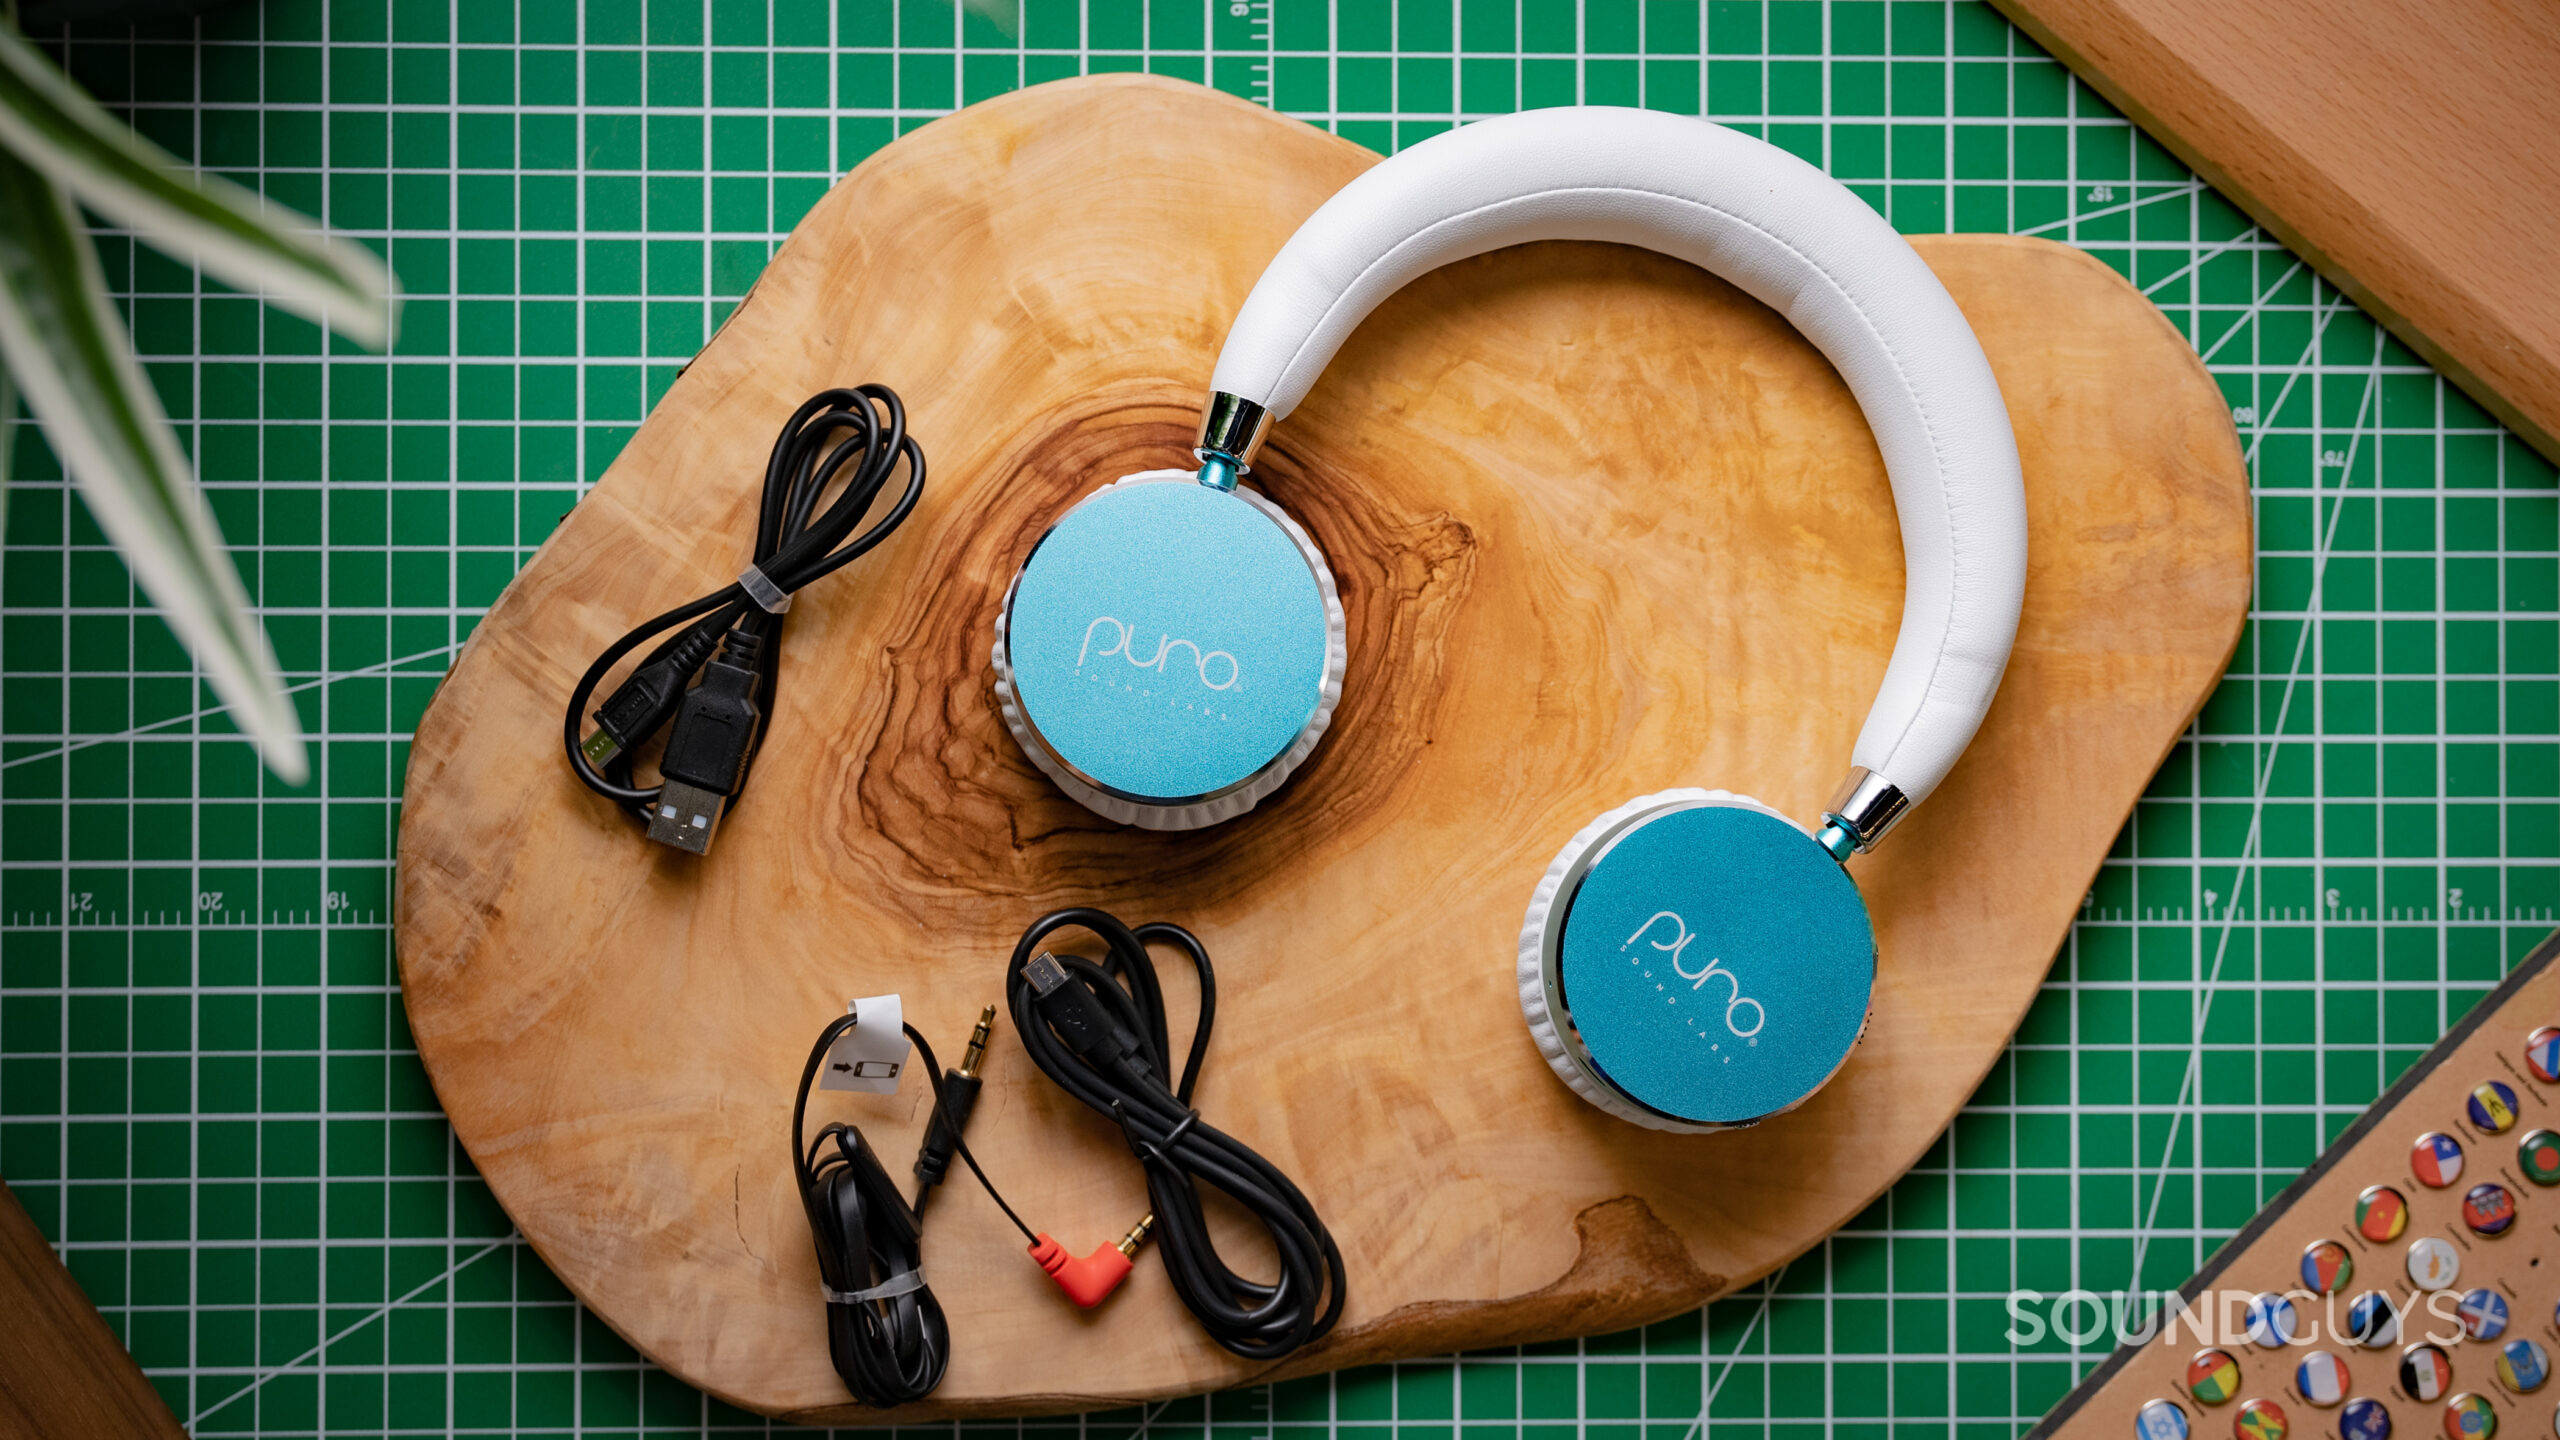 A photo of the Puro Sound Labs BT2200 sitting atop a wood slab, with its charging cable,